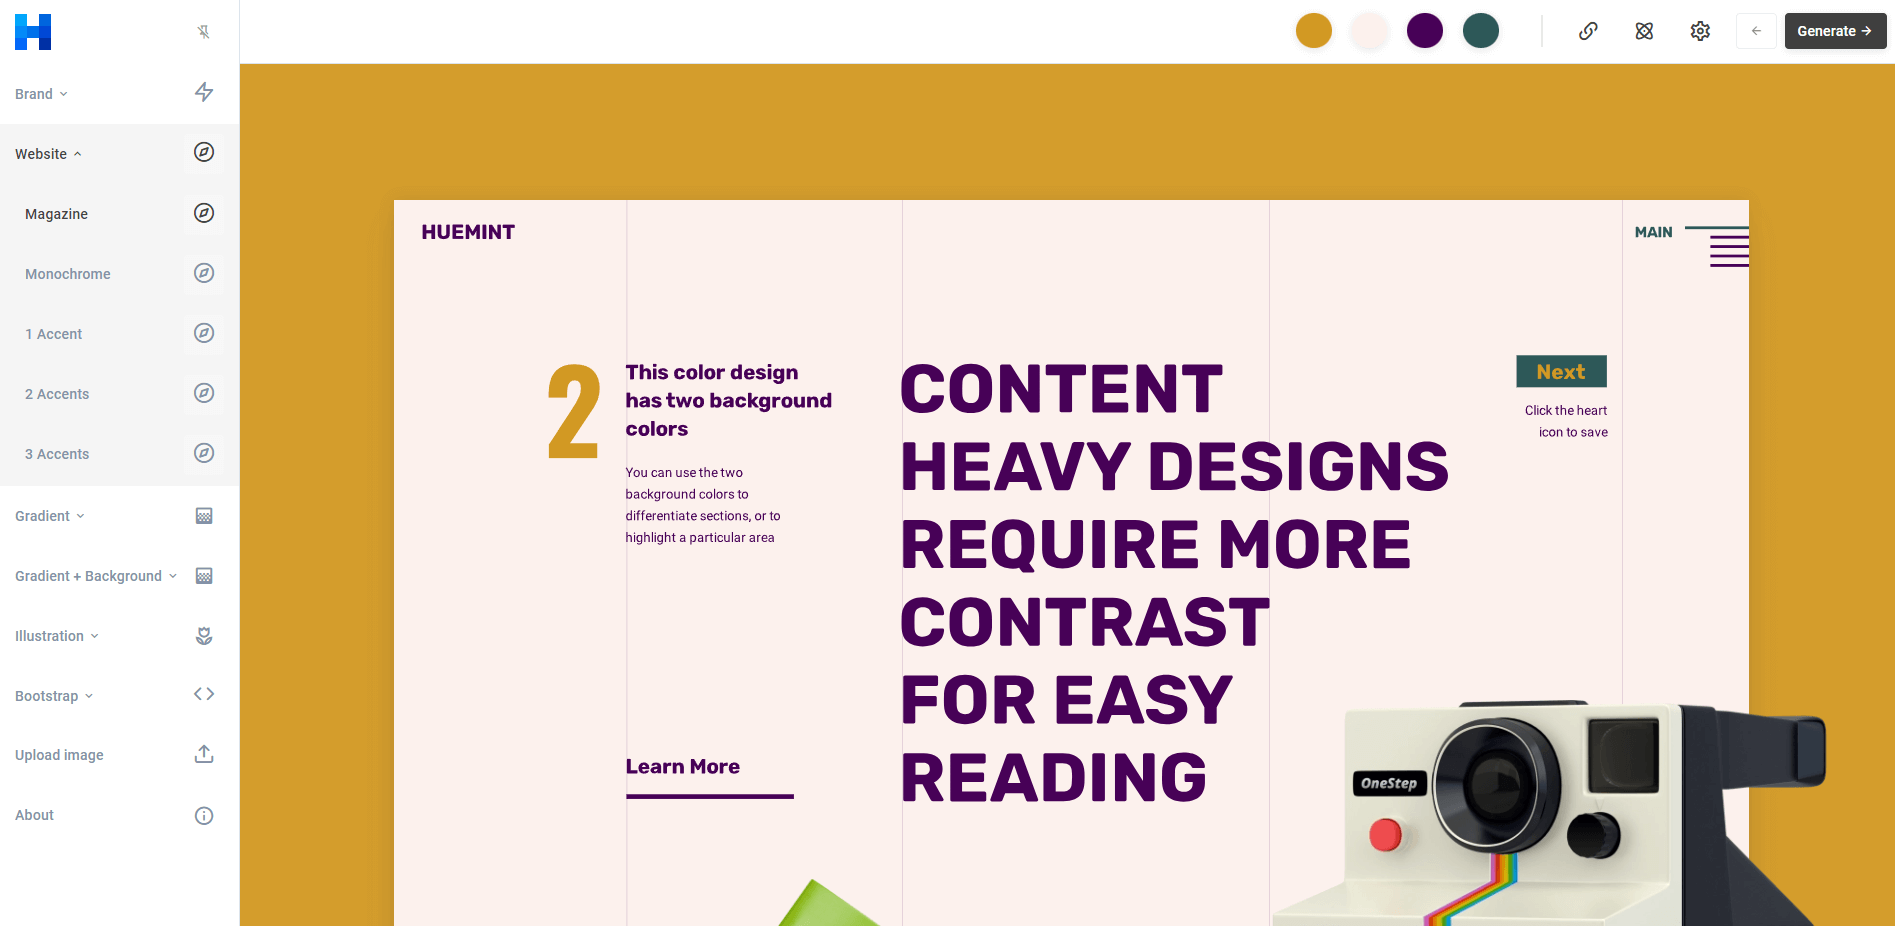 Huemint’s website mockup using an AI-generated color palette